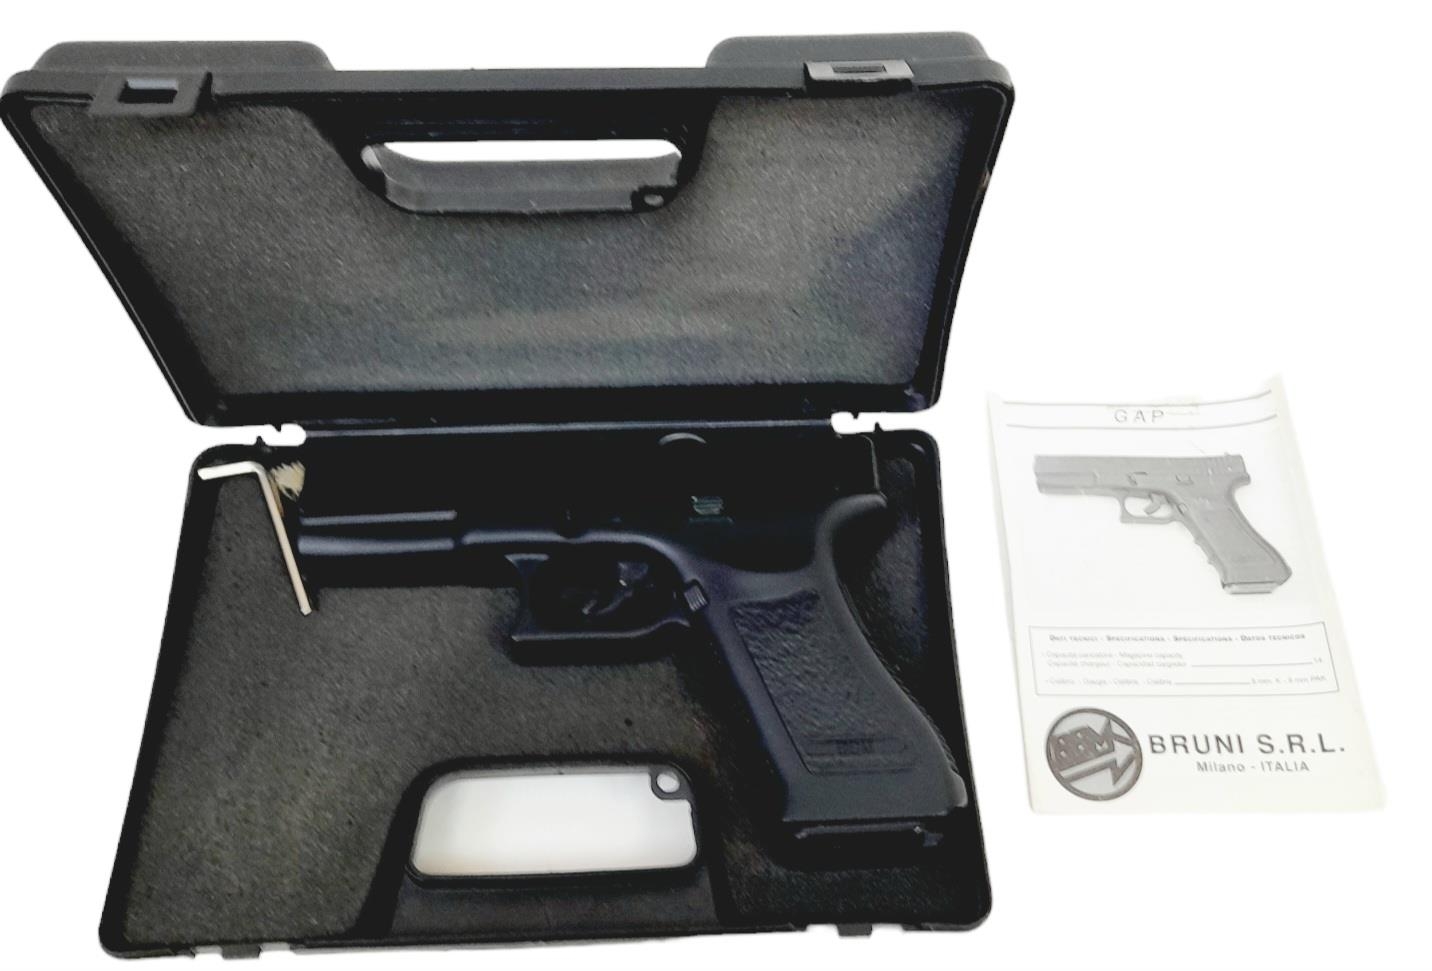 A Glock Gap 8mm Top Vented Blank Firing Pistol. Over 18 only. UK sales only. Blank guns should - Image 4 of 5